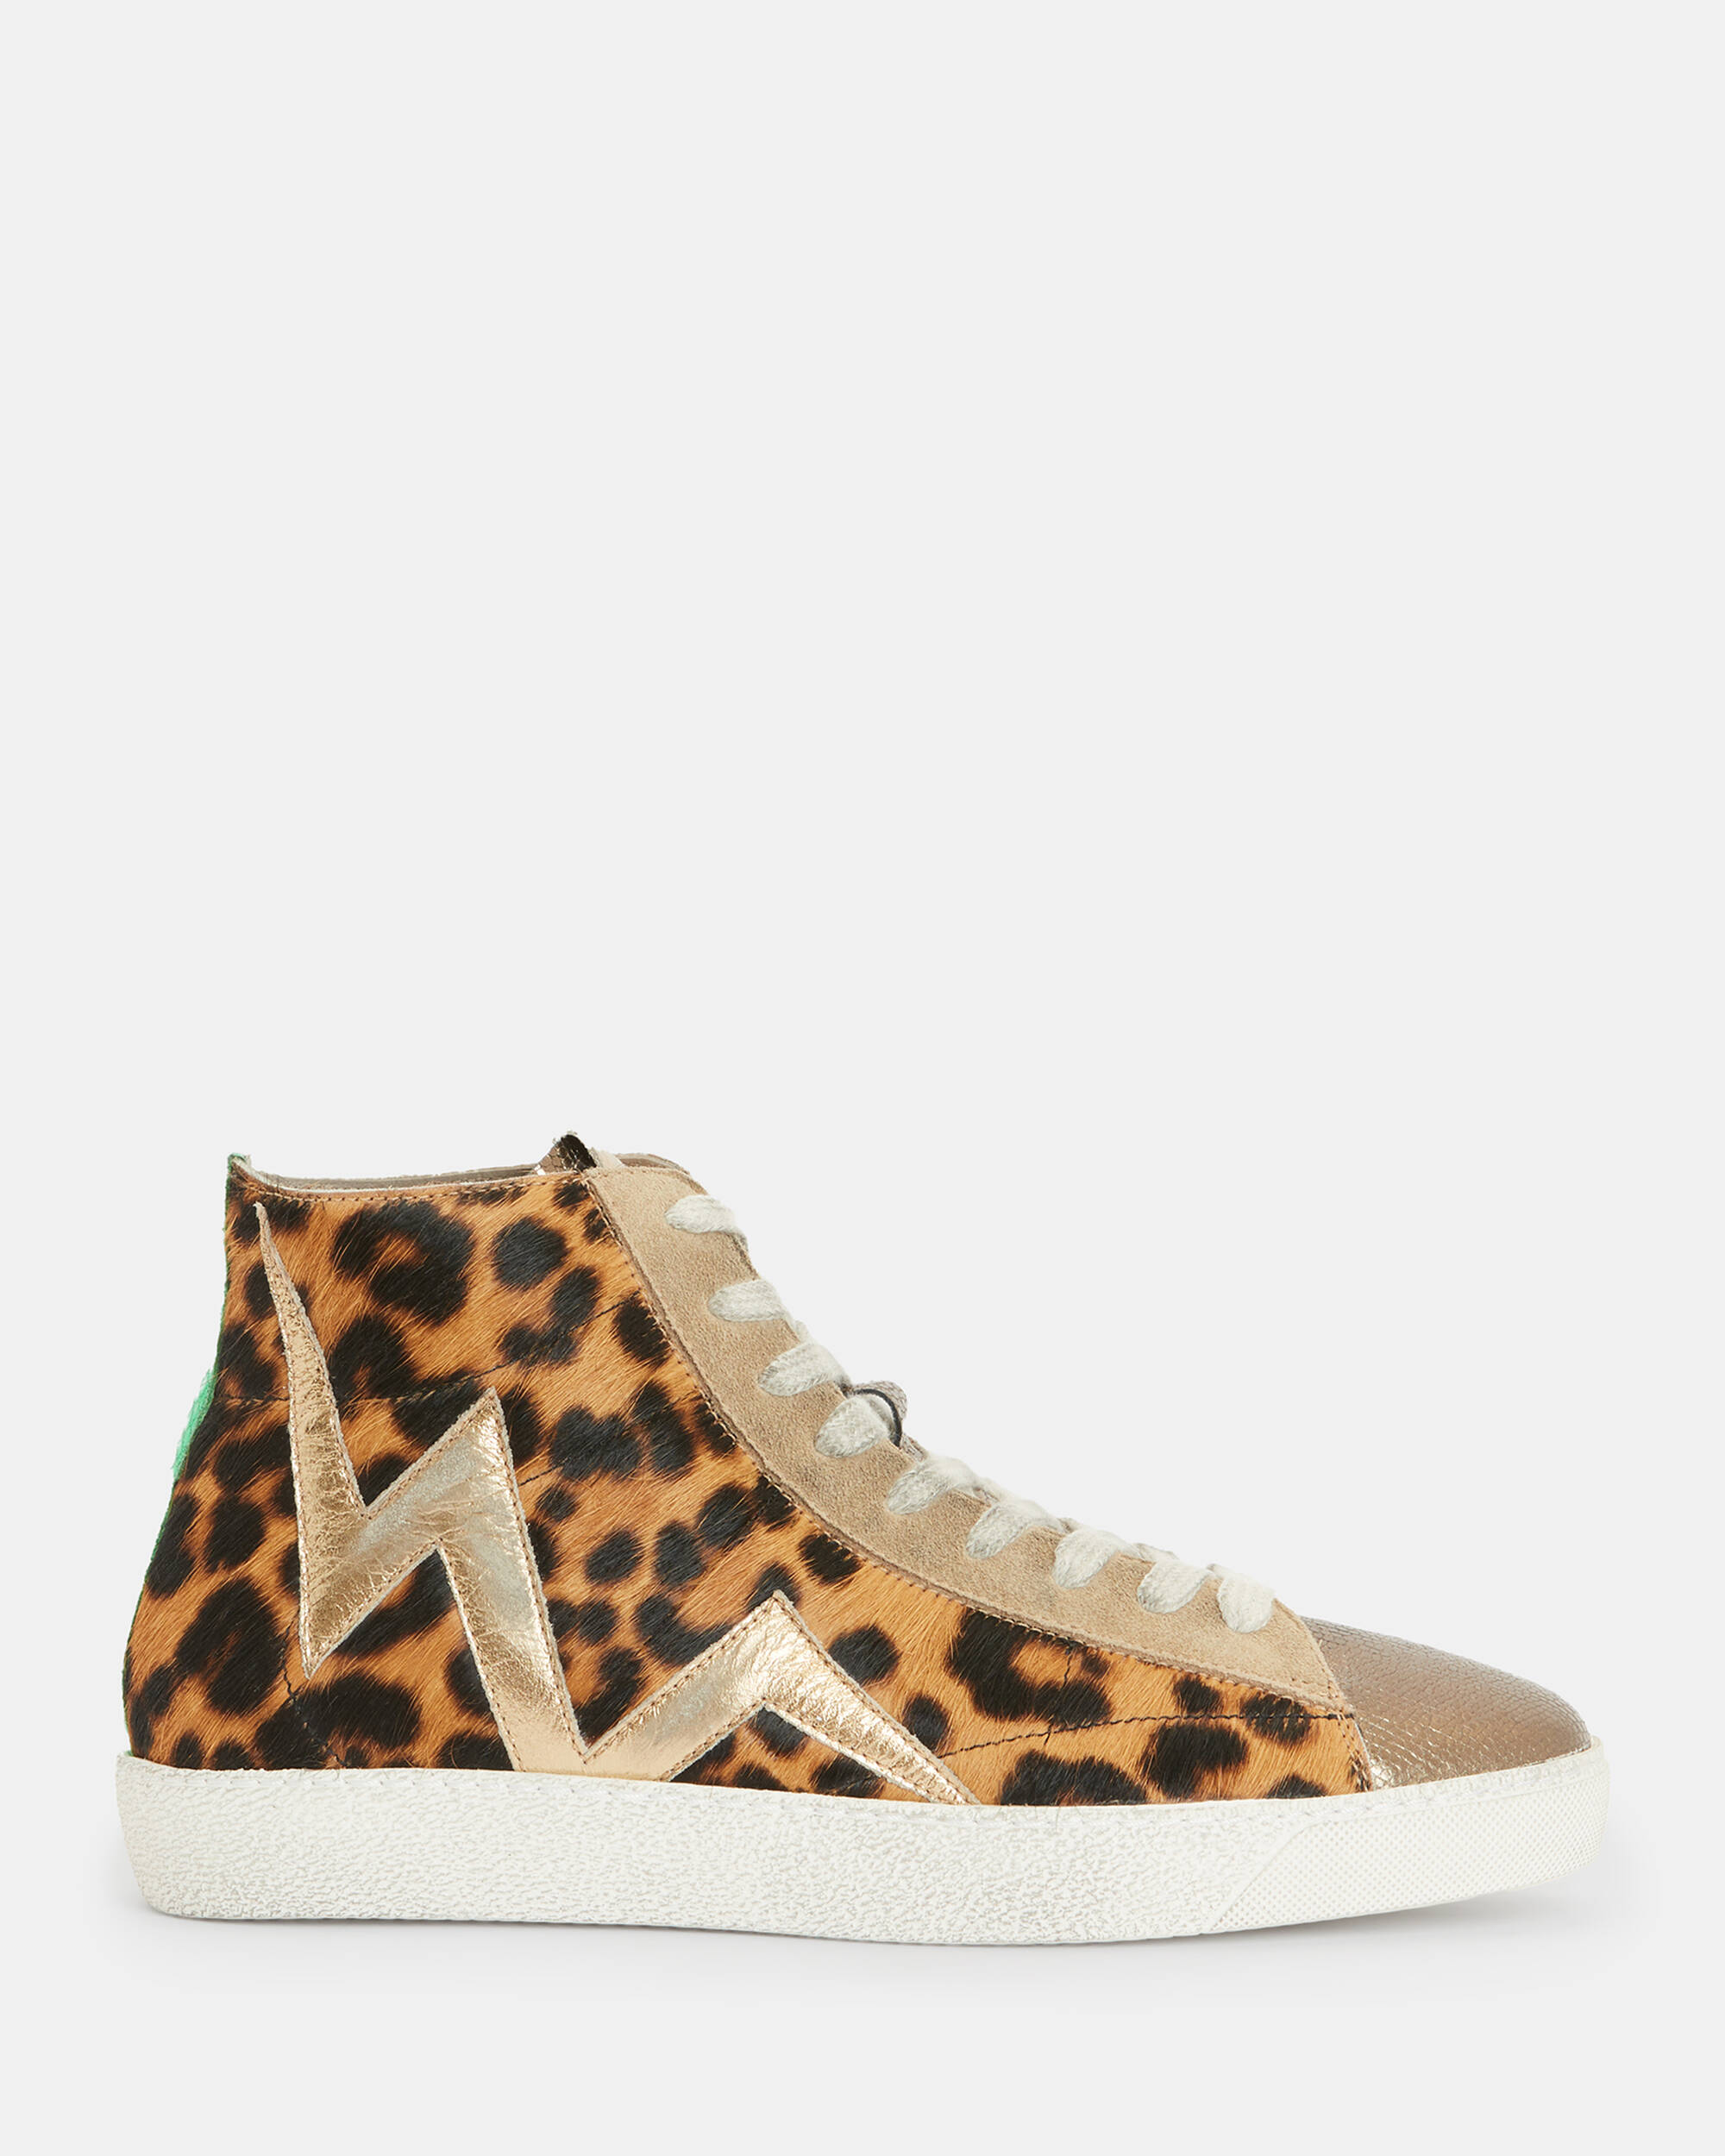 Tundy Bolt Leopard Print Leather Sneakers  large image number 1